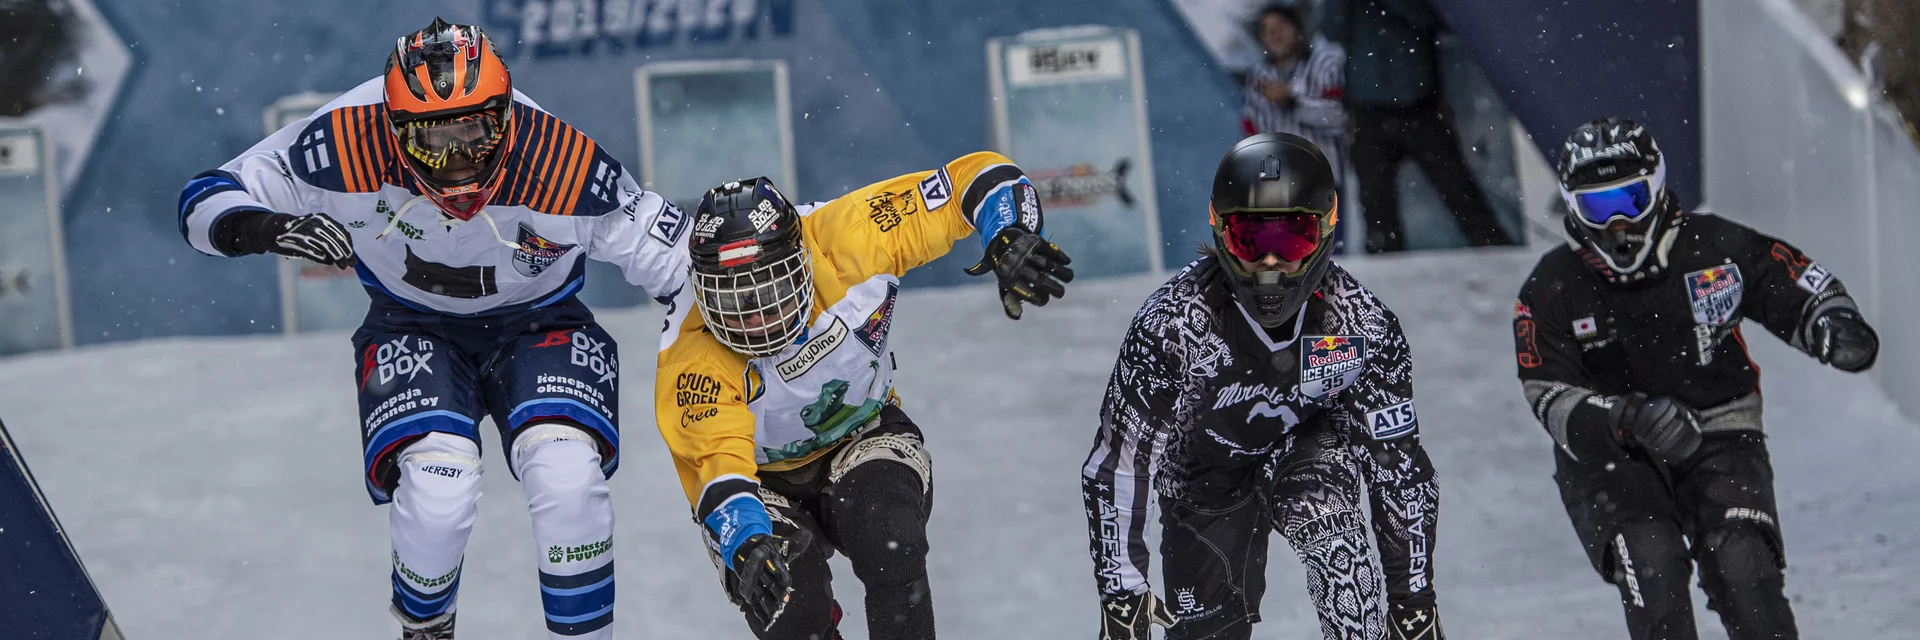 ATSX Ice Cross Weltcup | ©  Limex Images 